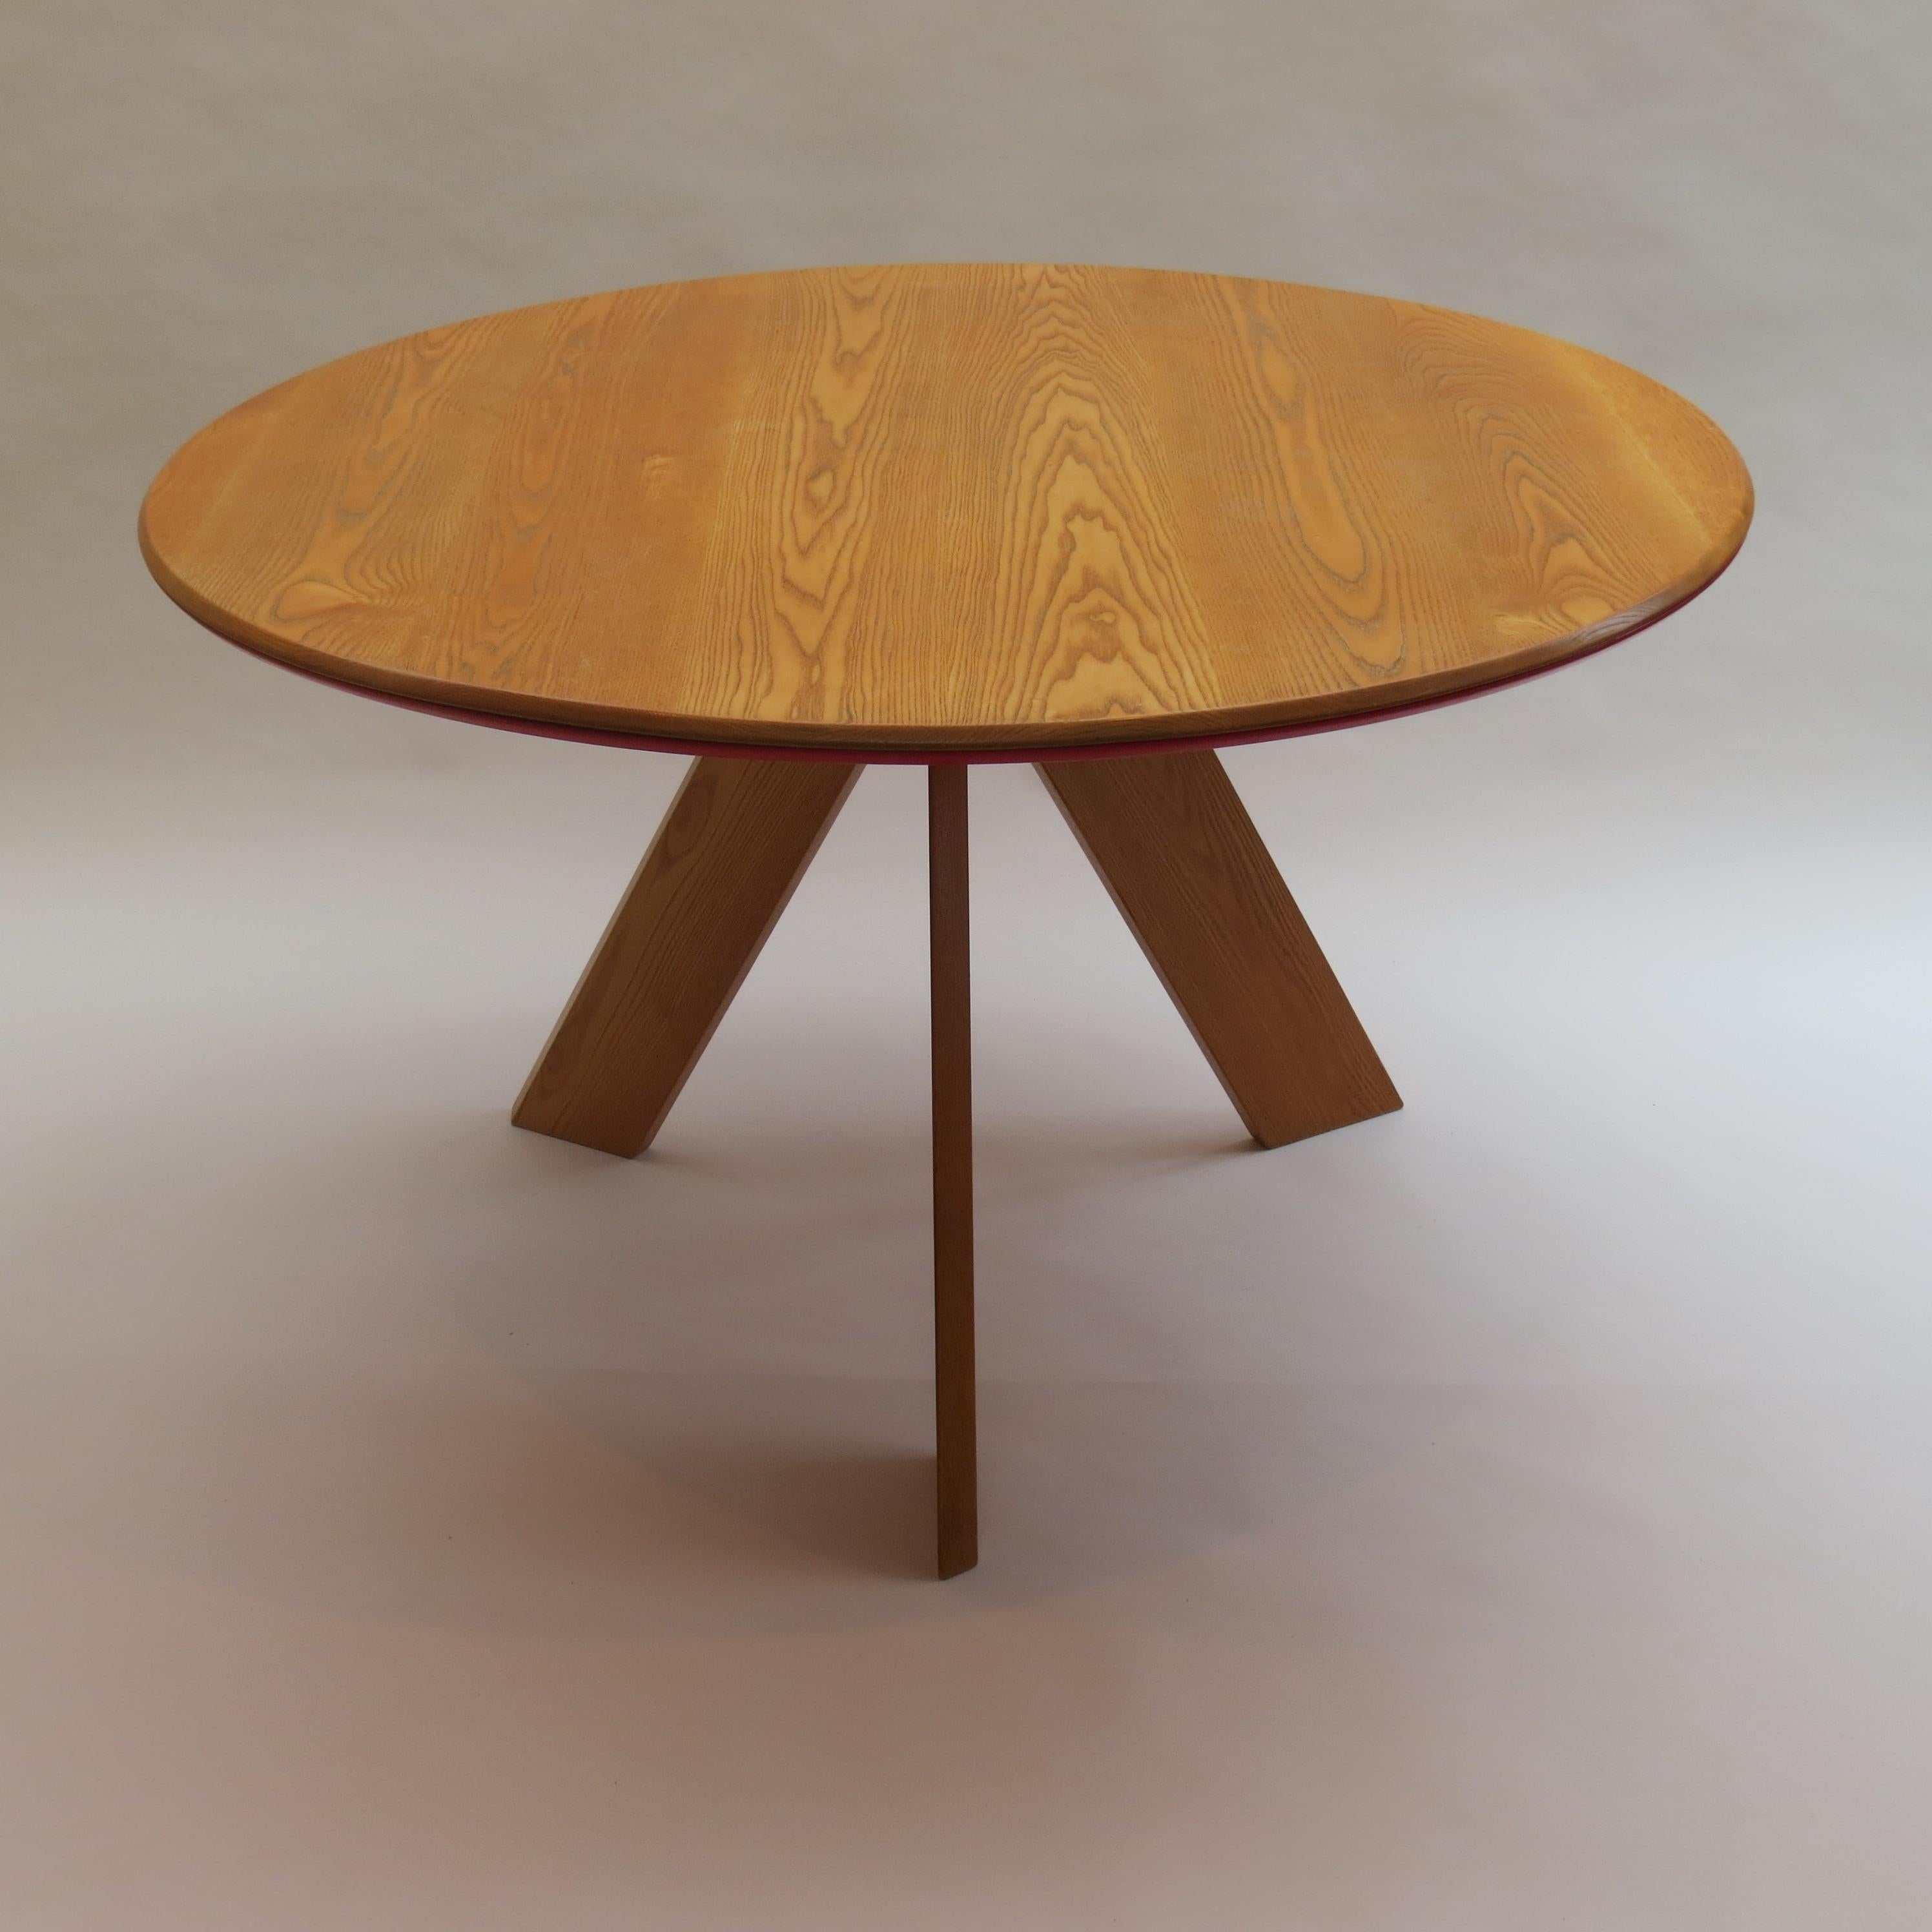 A very nicely detailed and good quality round dining table designed and produced by David Field. Bespoke made in solid ash base with blue aluminium Bose on the underside. The solid ash circular top has a painted red MDF to the underside.

A very